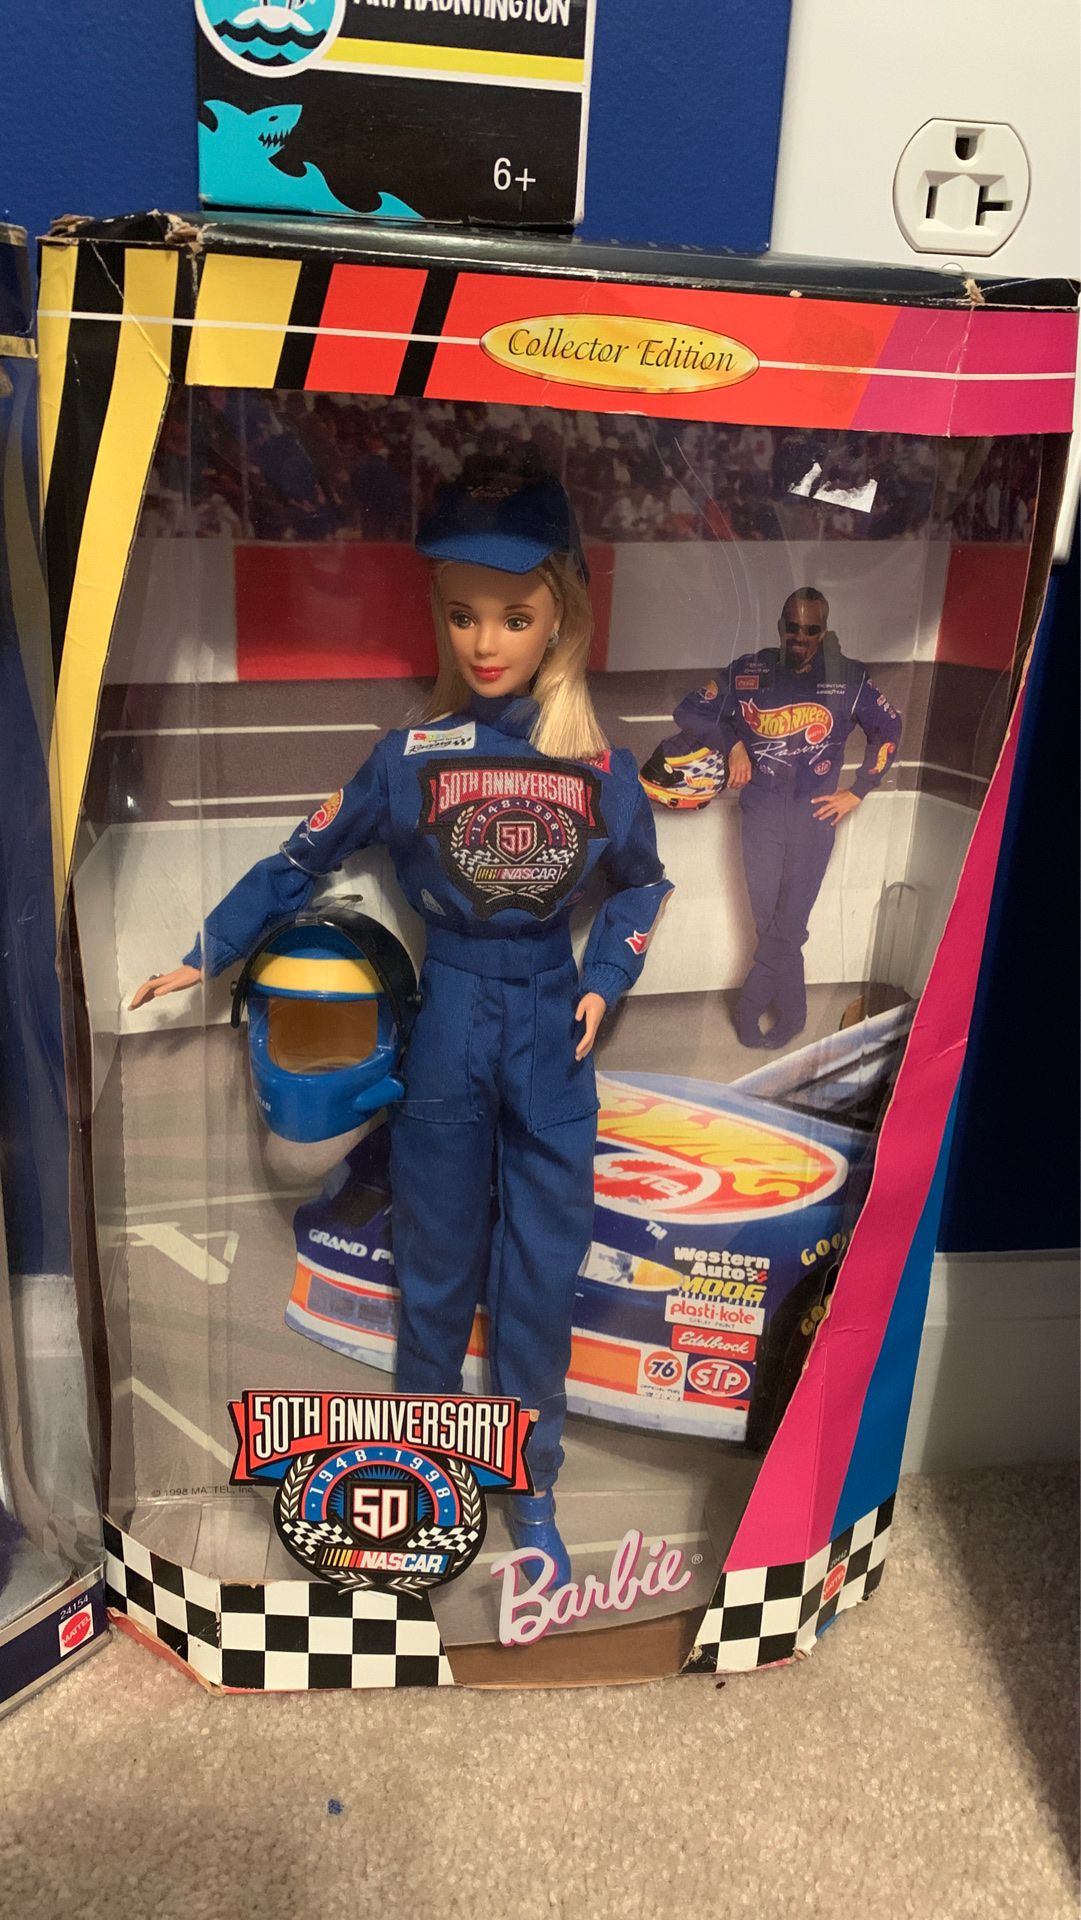 50th anniversary NASCAR Barbie edition collector item